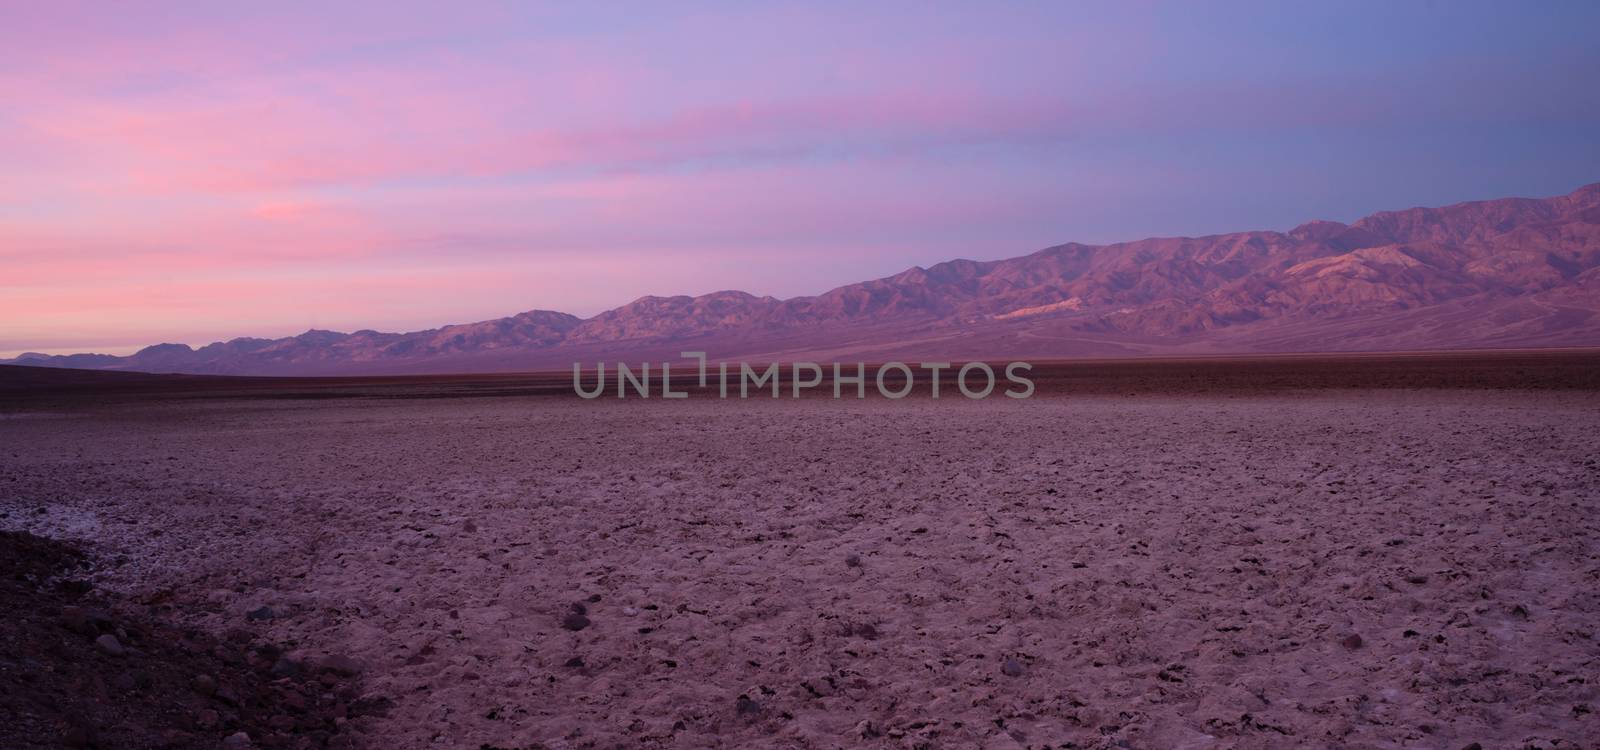 Sentinel Mountain Telescope Peak Badwater Road Death Valley Basi by ChrisBoswell